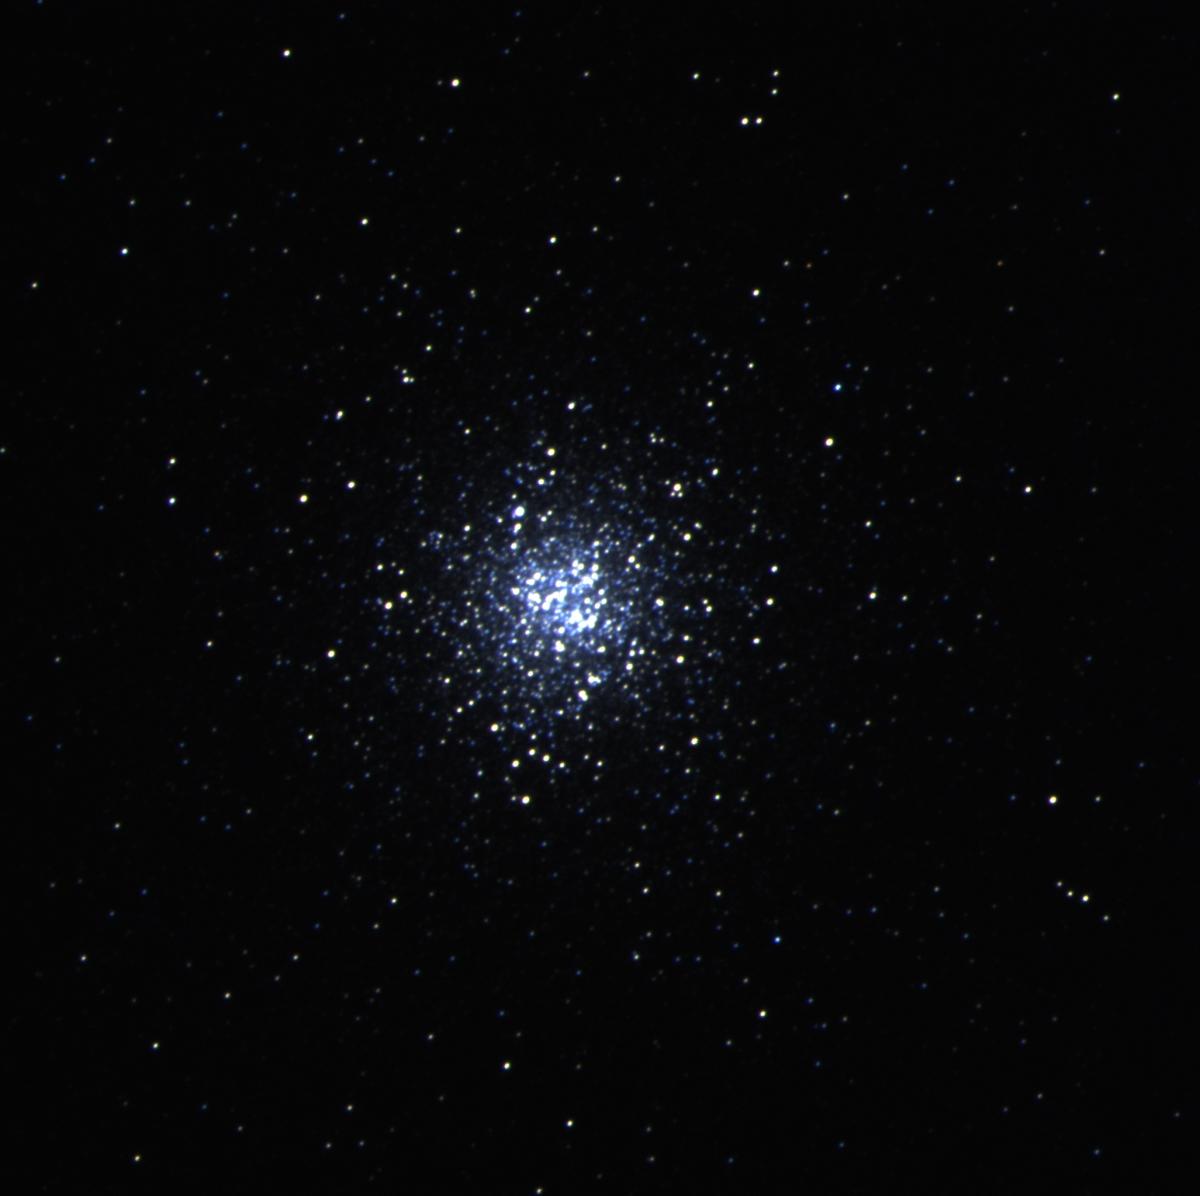 An image of a globular cluster of stars taken by the telescope